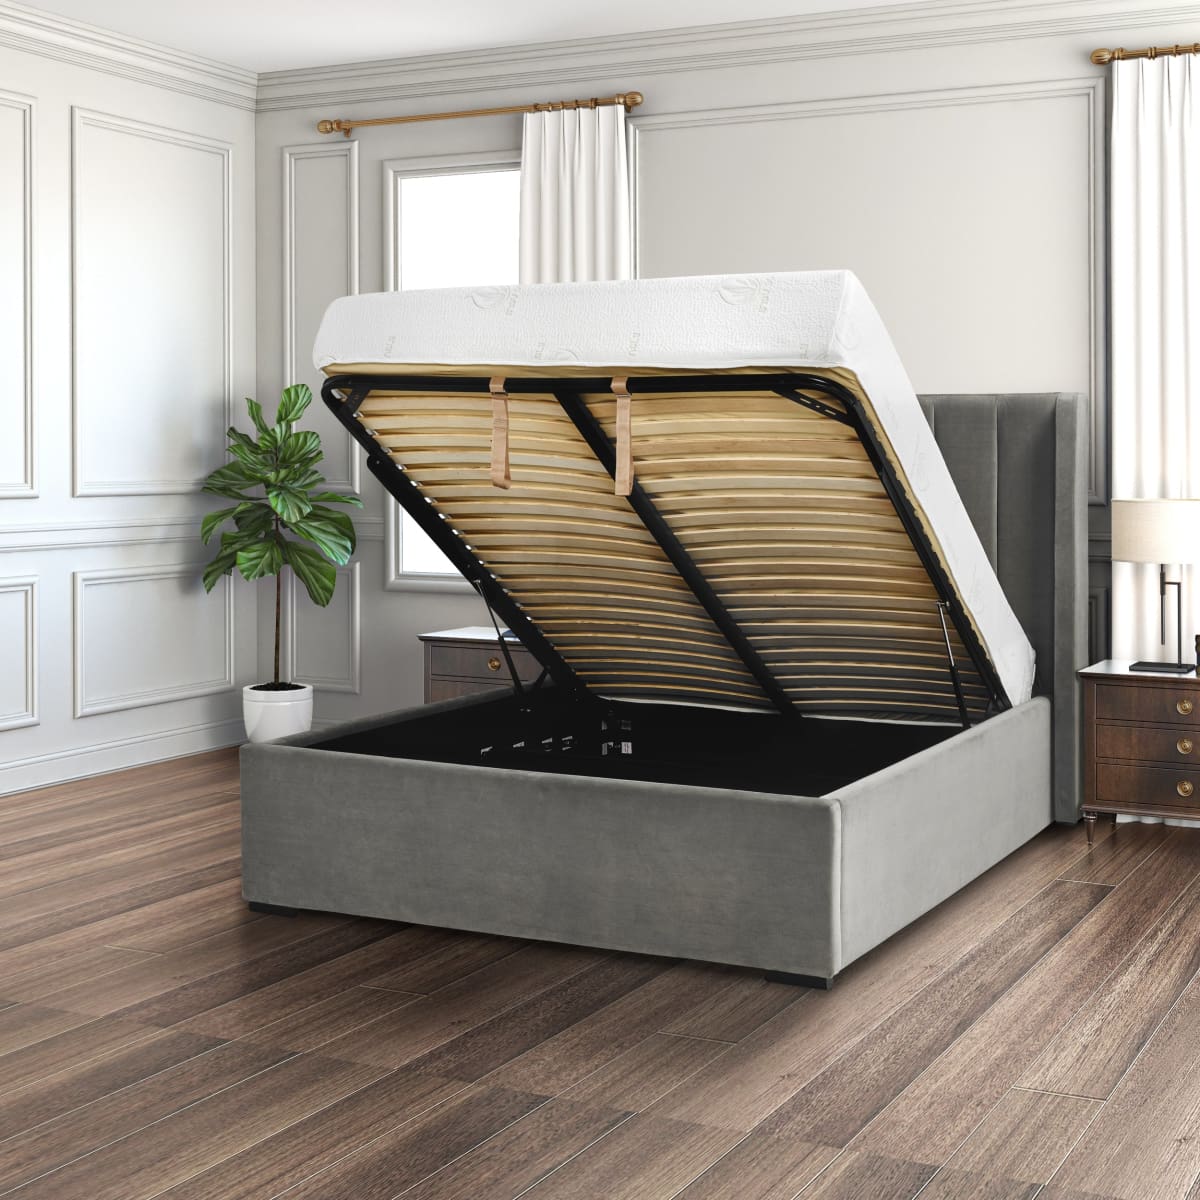 Aava Storage Bed - bed